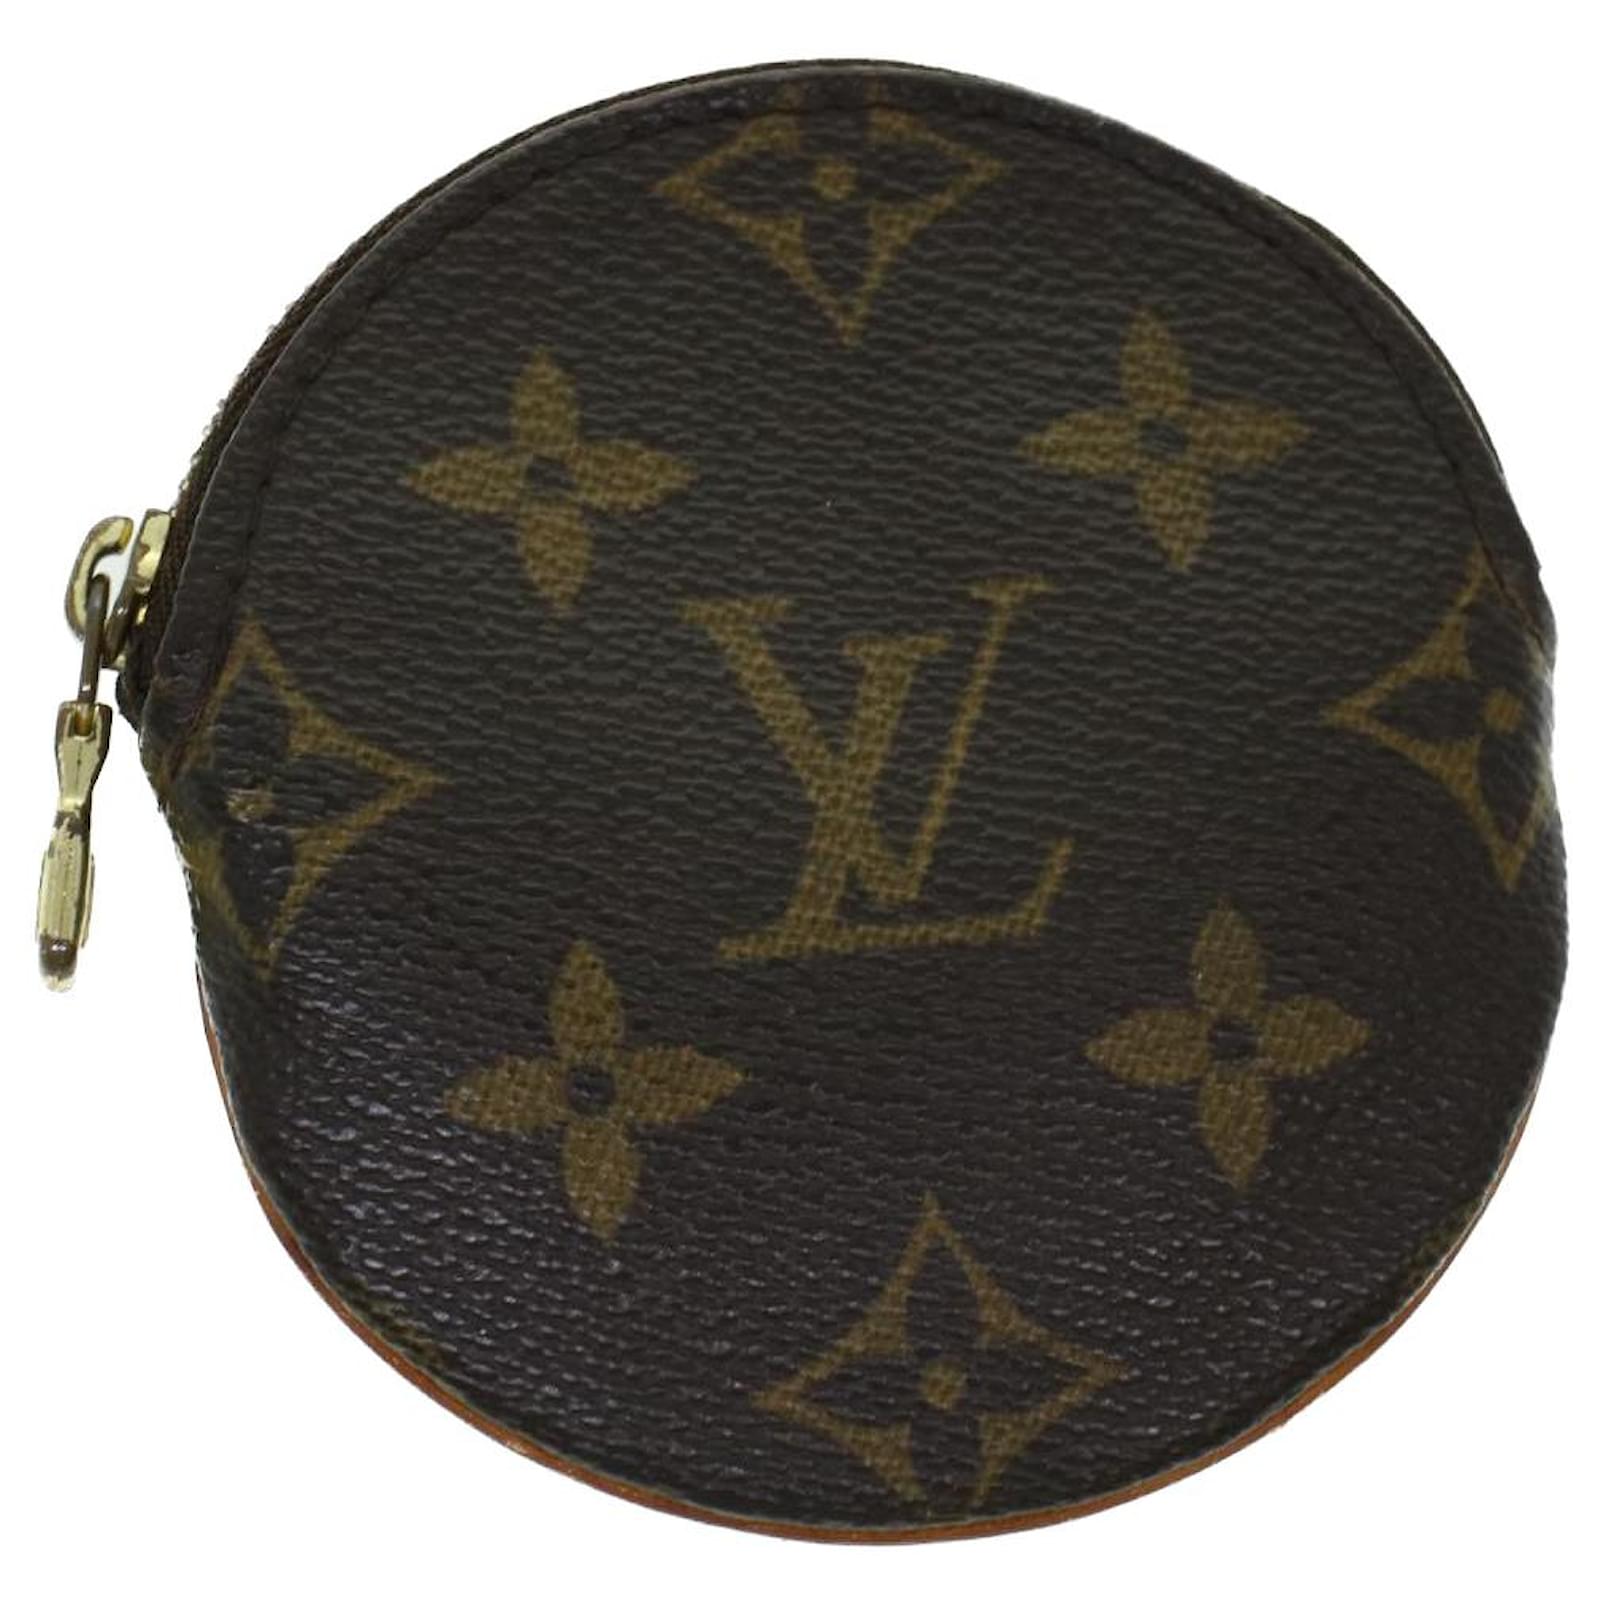 Louis Vuitton | Round Coin Purse | What Fits Inside? - YouTube